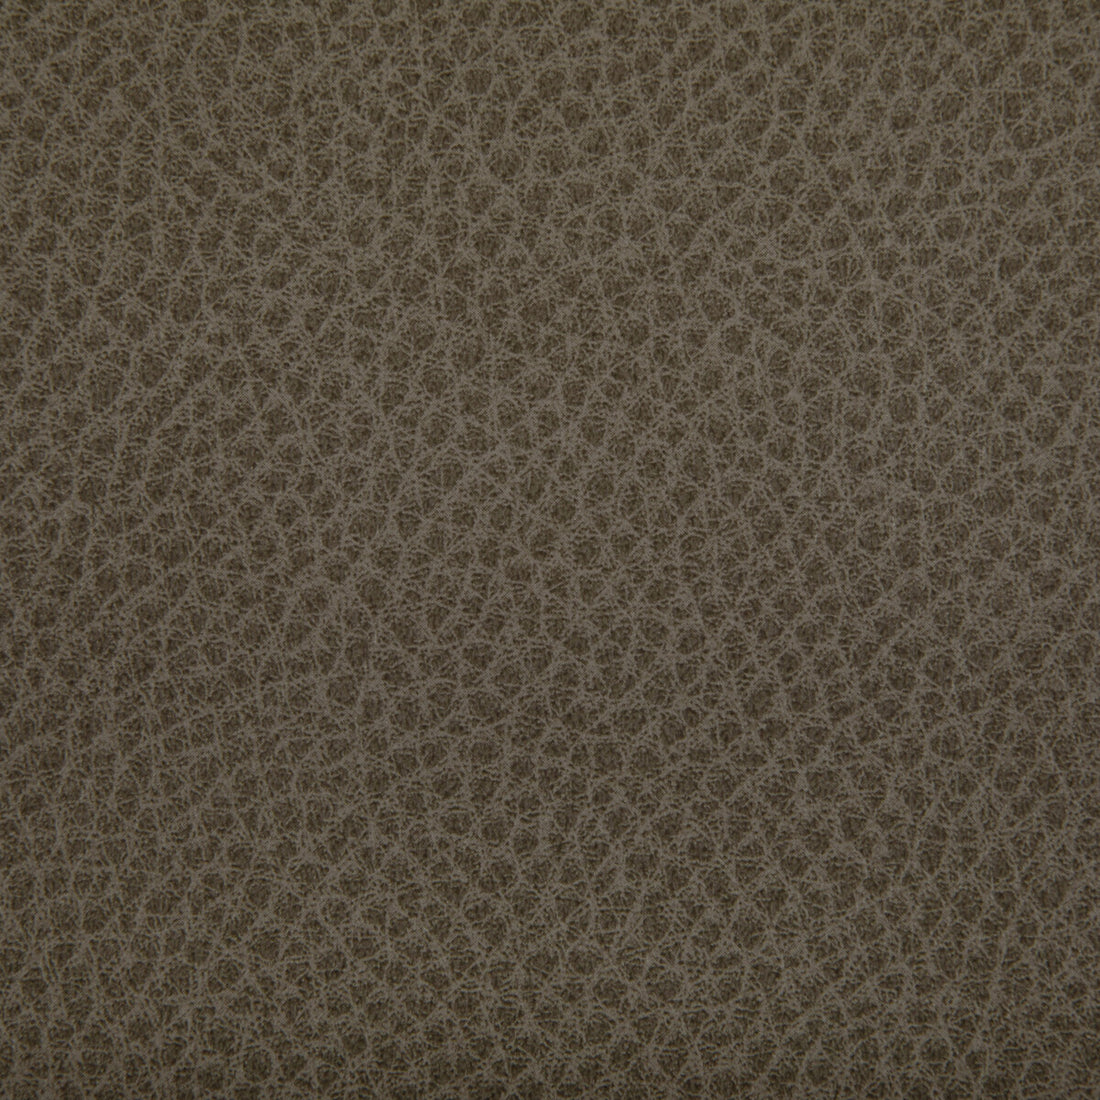 Woolf fabric in etruscan color - pattern WOOLF.106.0 - by Kravet Contract